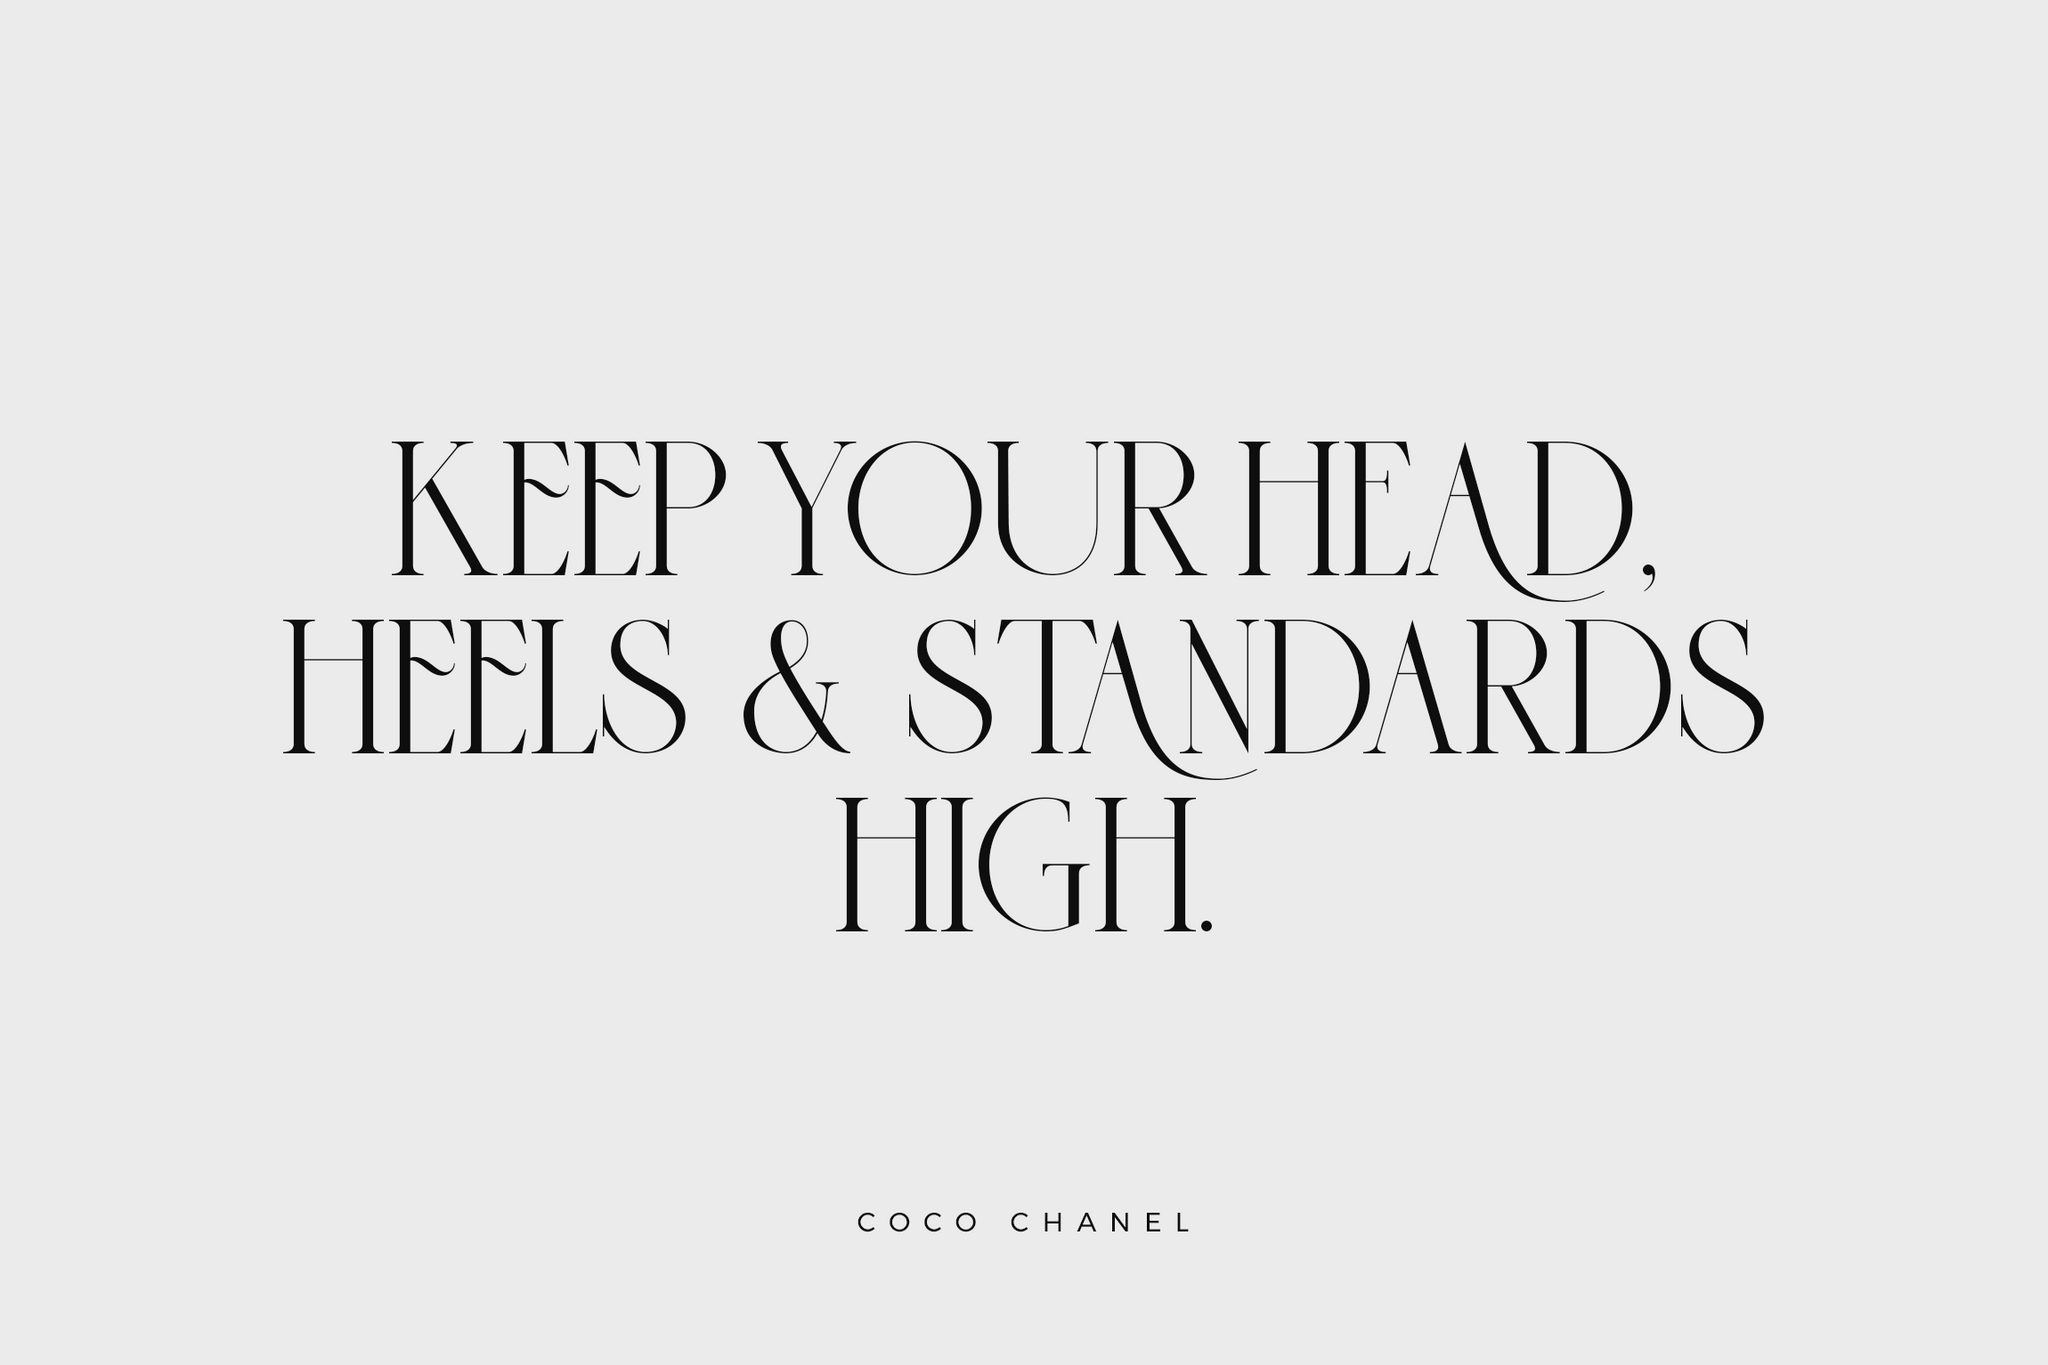 Keep your head, heels & standards high - Sauvage Art Deco Typeface